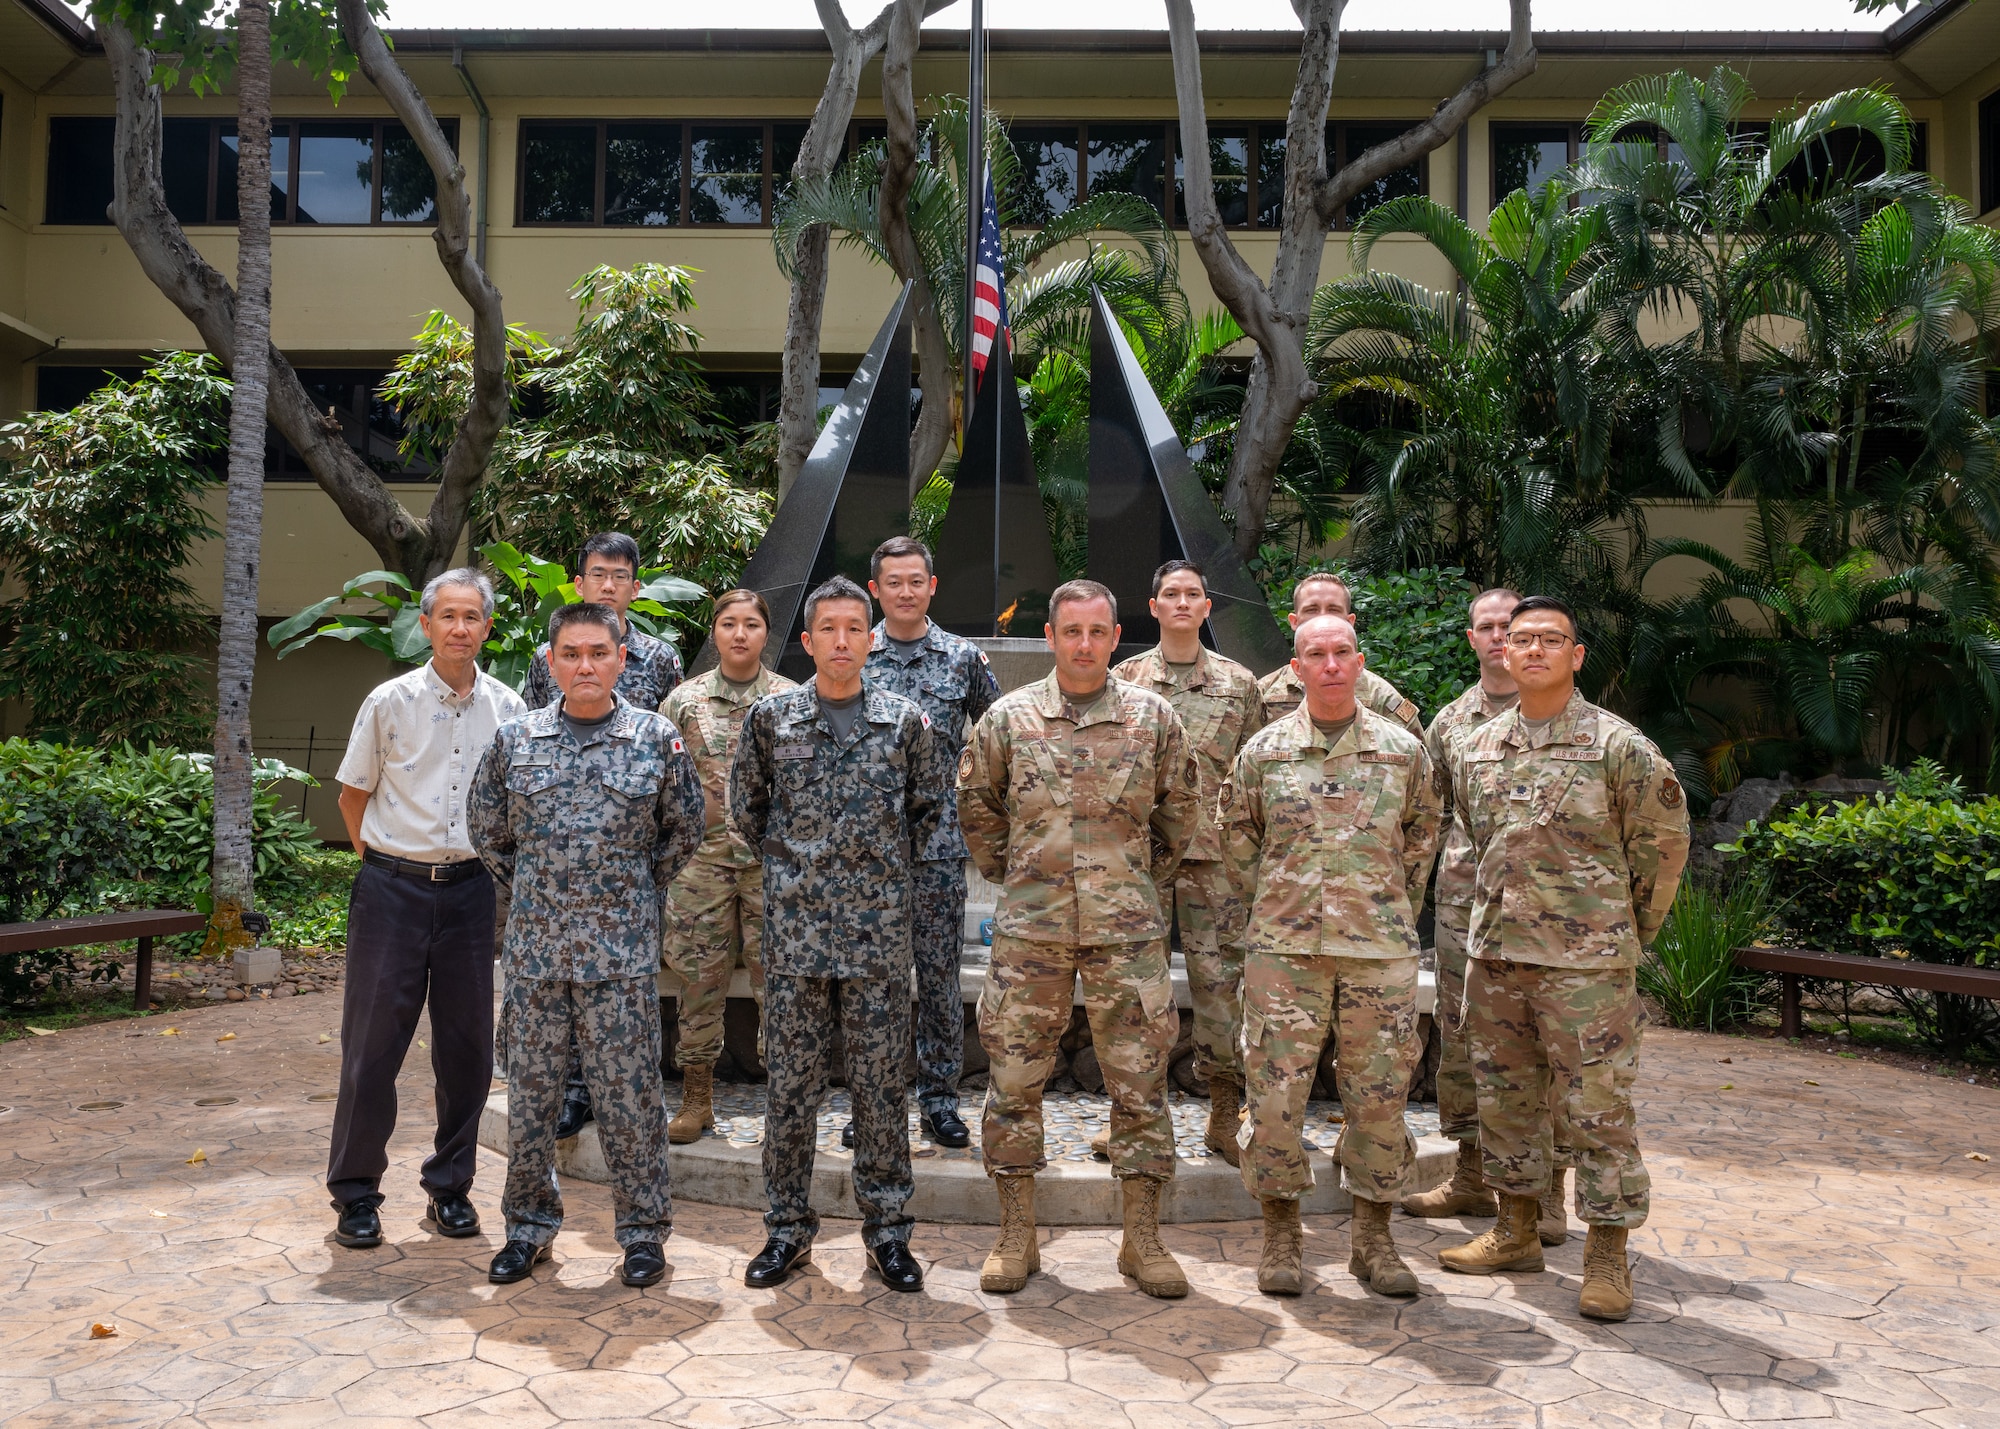 Group photo of U.S. Air Force and Japan Air Self Defense Force Airmen standing together.